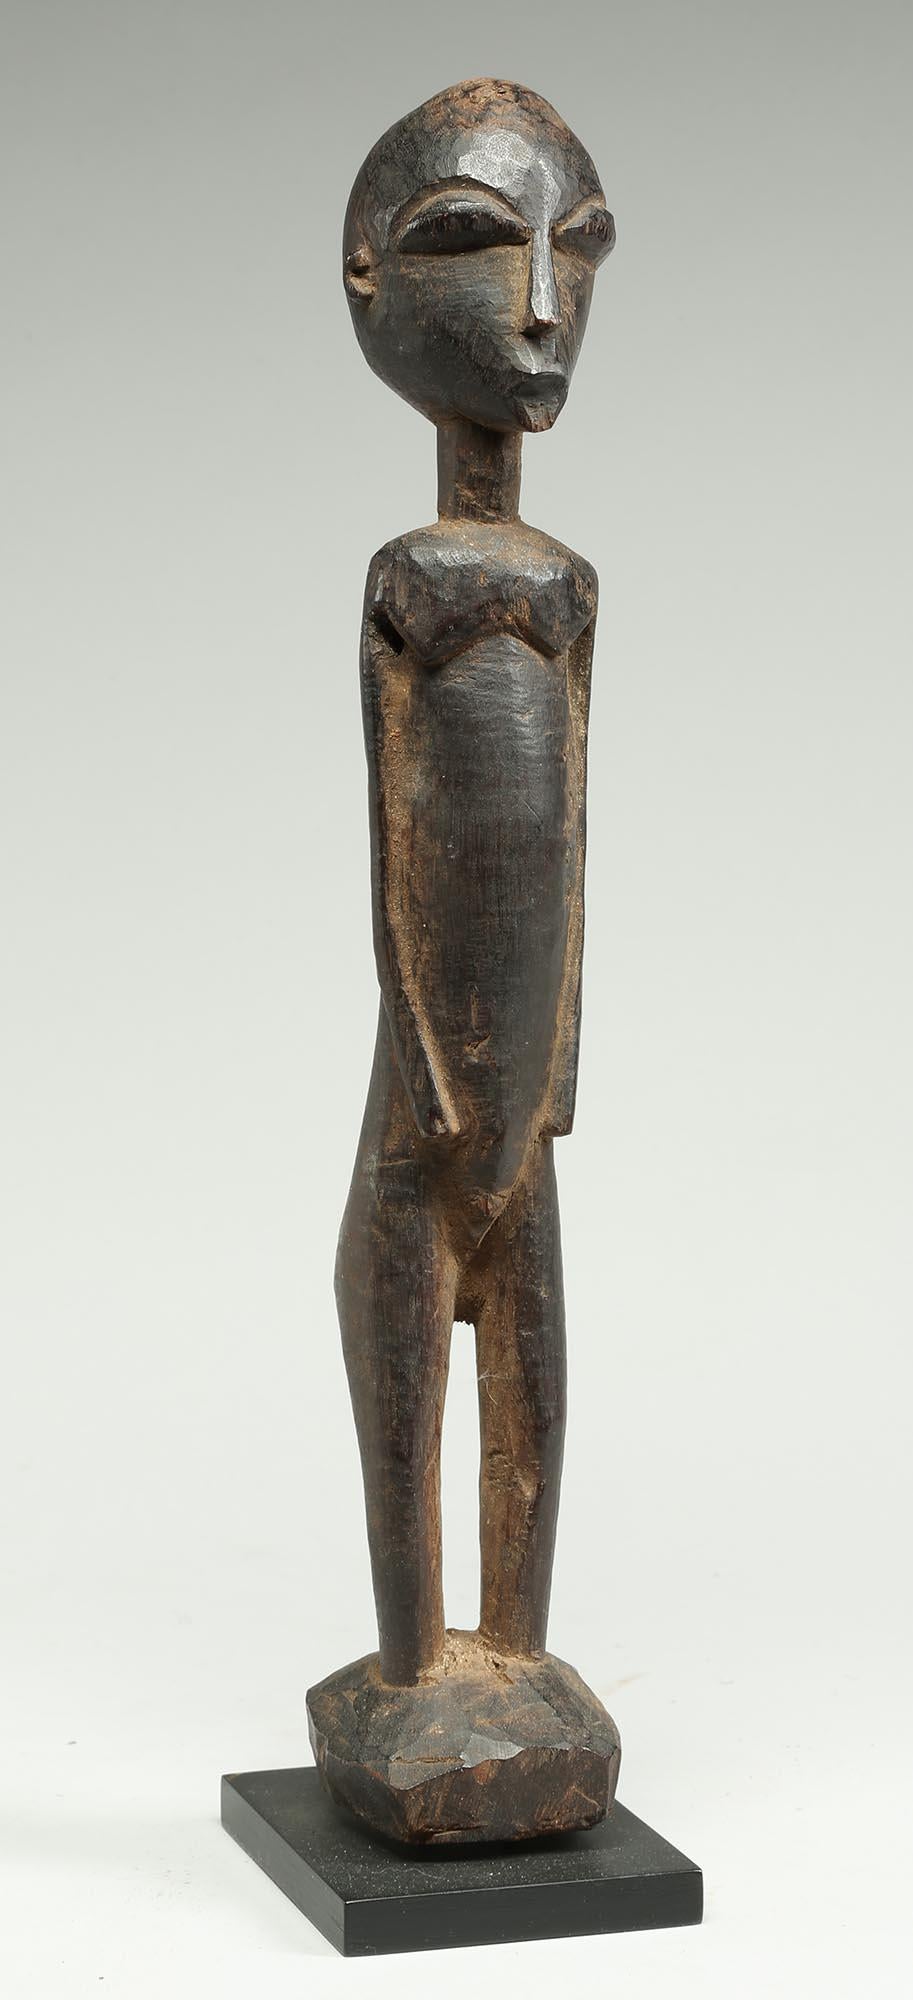 Tribal Tall Elegant Standing Lobi Figure with Expressive Face, Early 20th Century Ghana